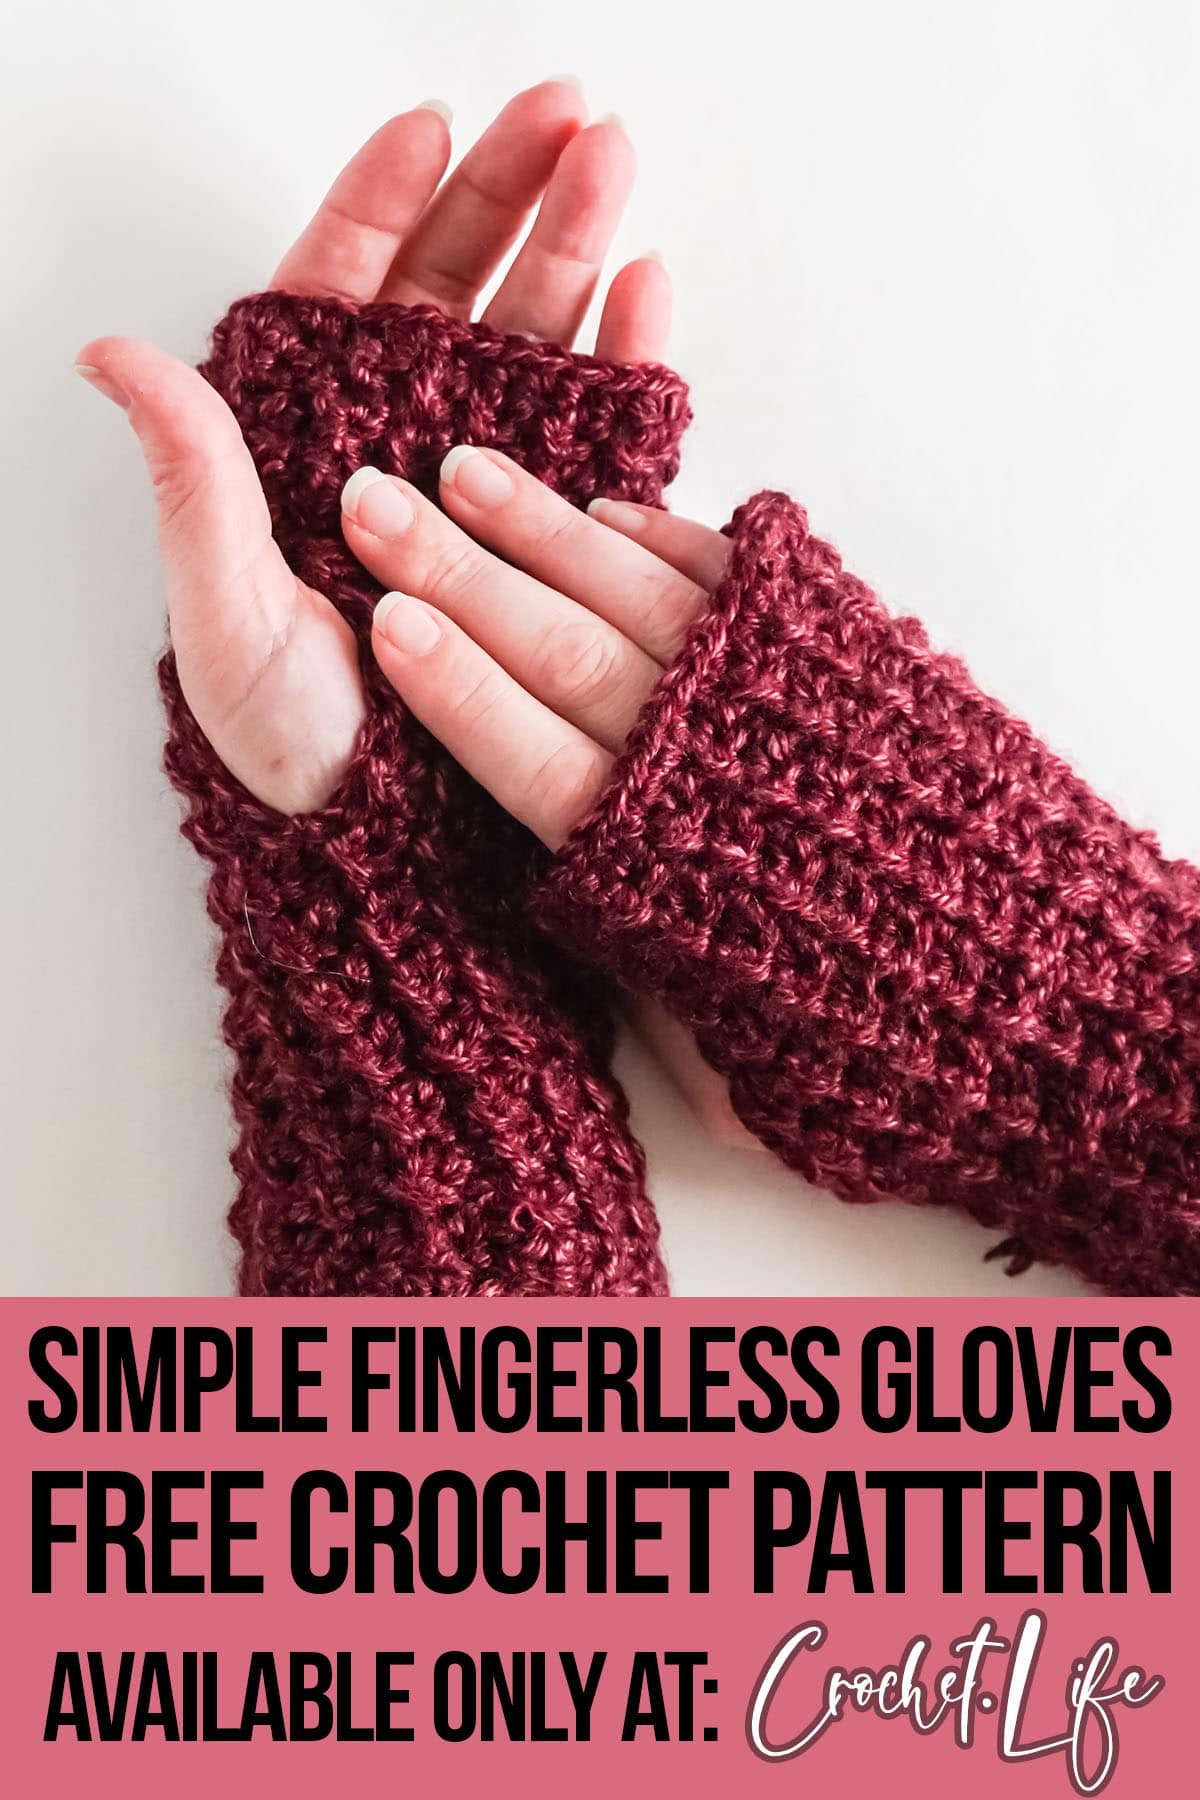 crochet pattern for finger less gloves with text which reads simple fingerless gloves free crochet pattern 